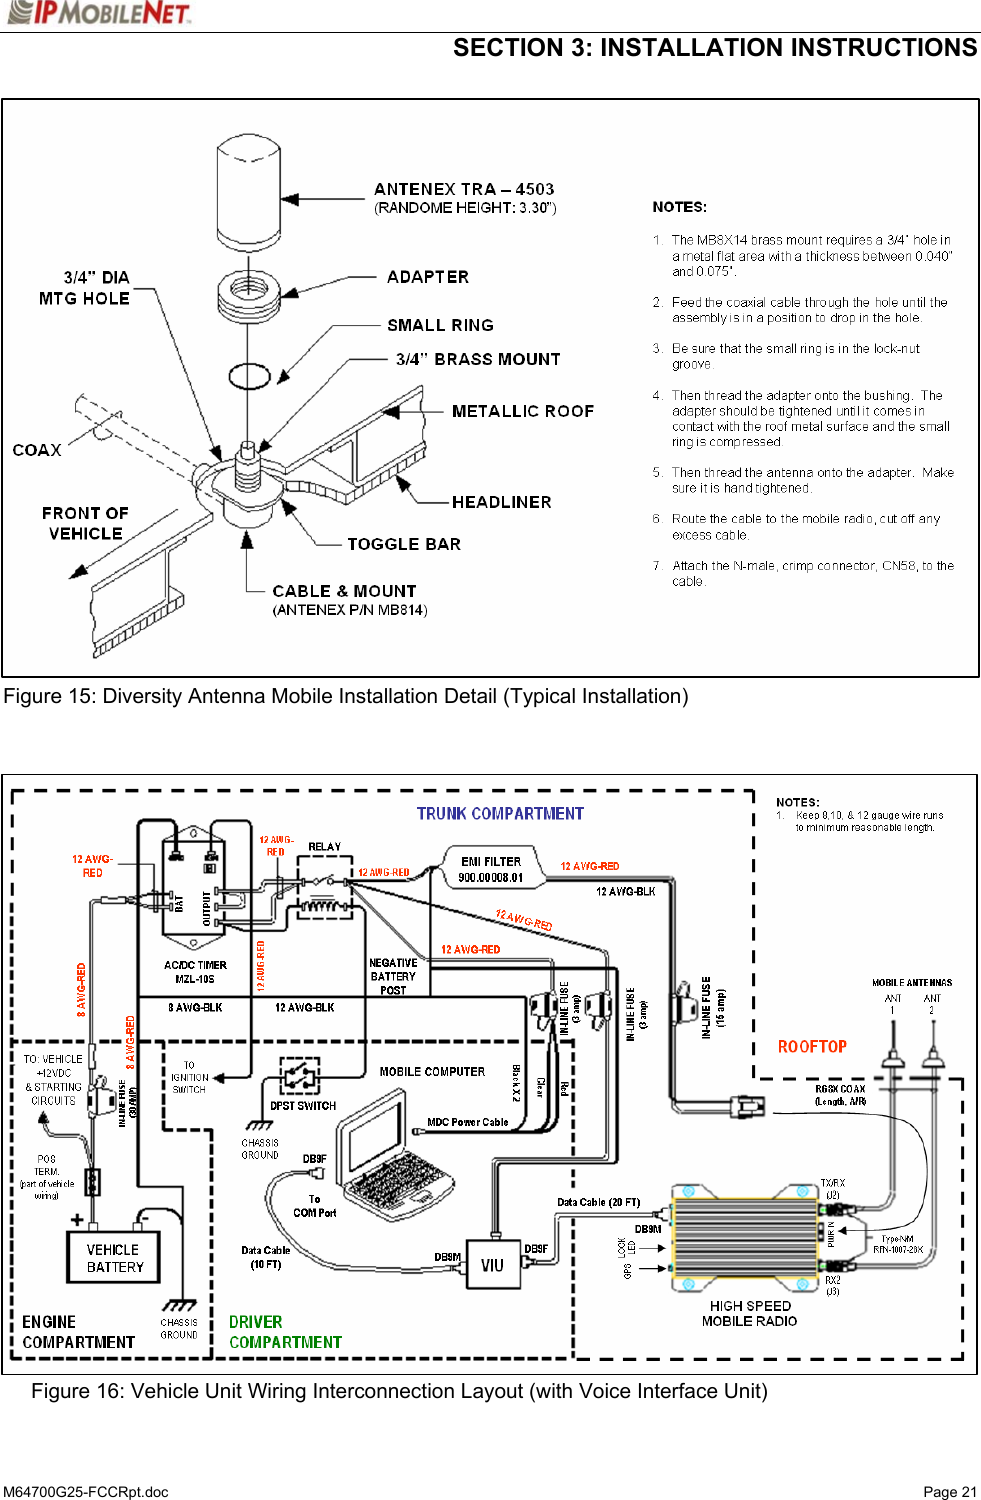  SECTION 3: INSTALLATION INSTRUCTIONS  M64700G25-FCCRpt.doc   Page 21                          Figure 15: Diversity Antenna Mobile Installation Detail (Typical Installation)                               Figure 16: Vehicle Unit Wiring Interconnection Layout (with Voice Interface Unit) 